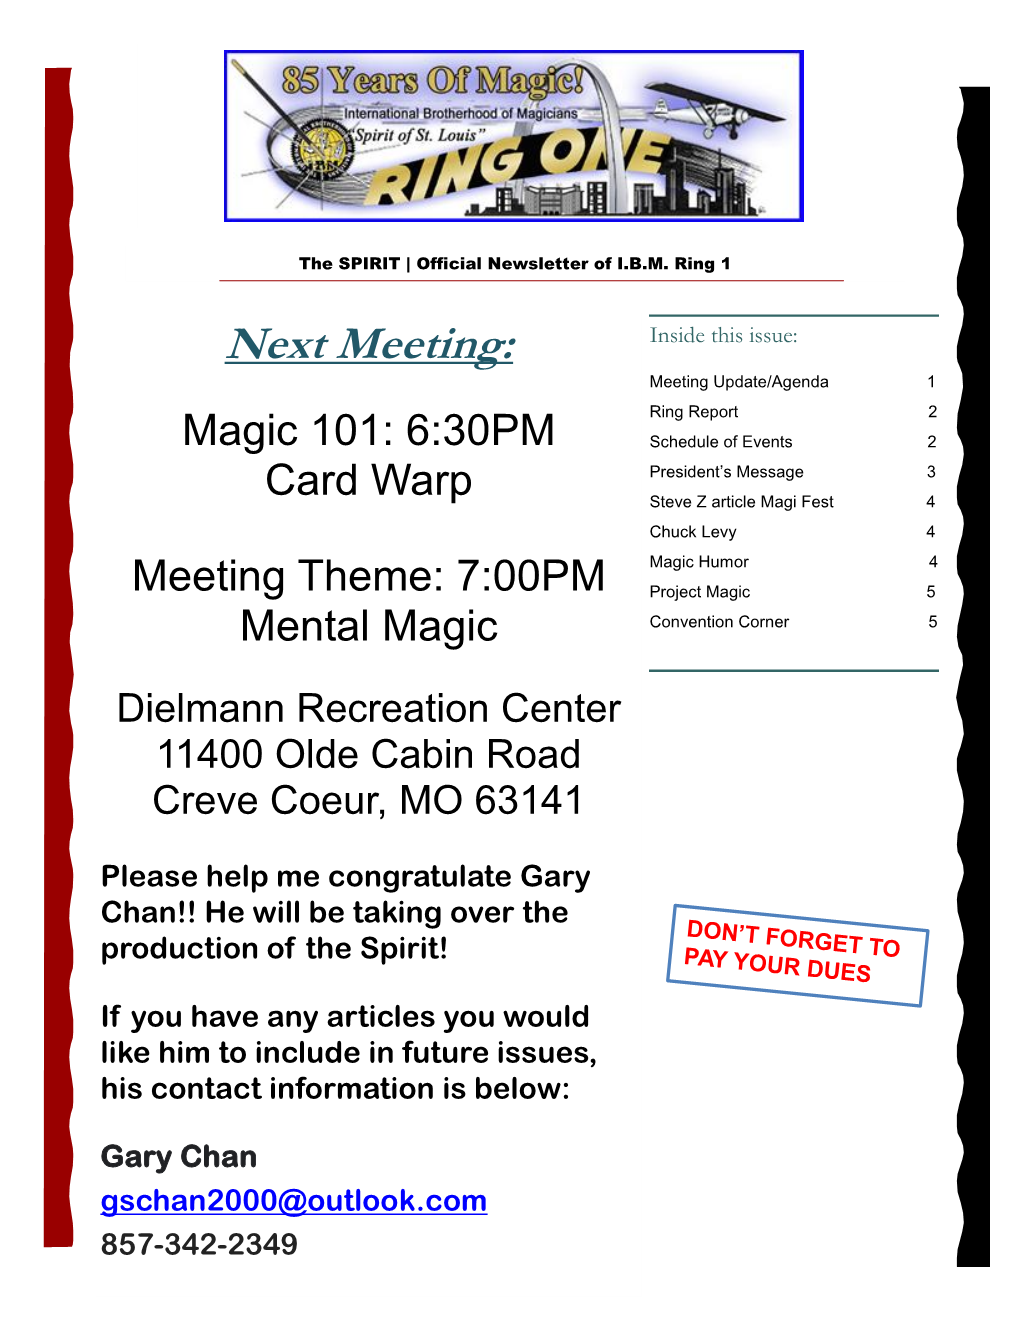 Next Meeting: Meeting Update/Agenda 1 Ring Report 2 Magic 101: 6:30PM Schedule of Events 2 President’S Message 3 Card Warp Steve Z Article Magi Fest 4